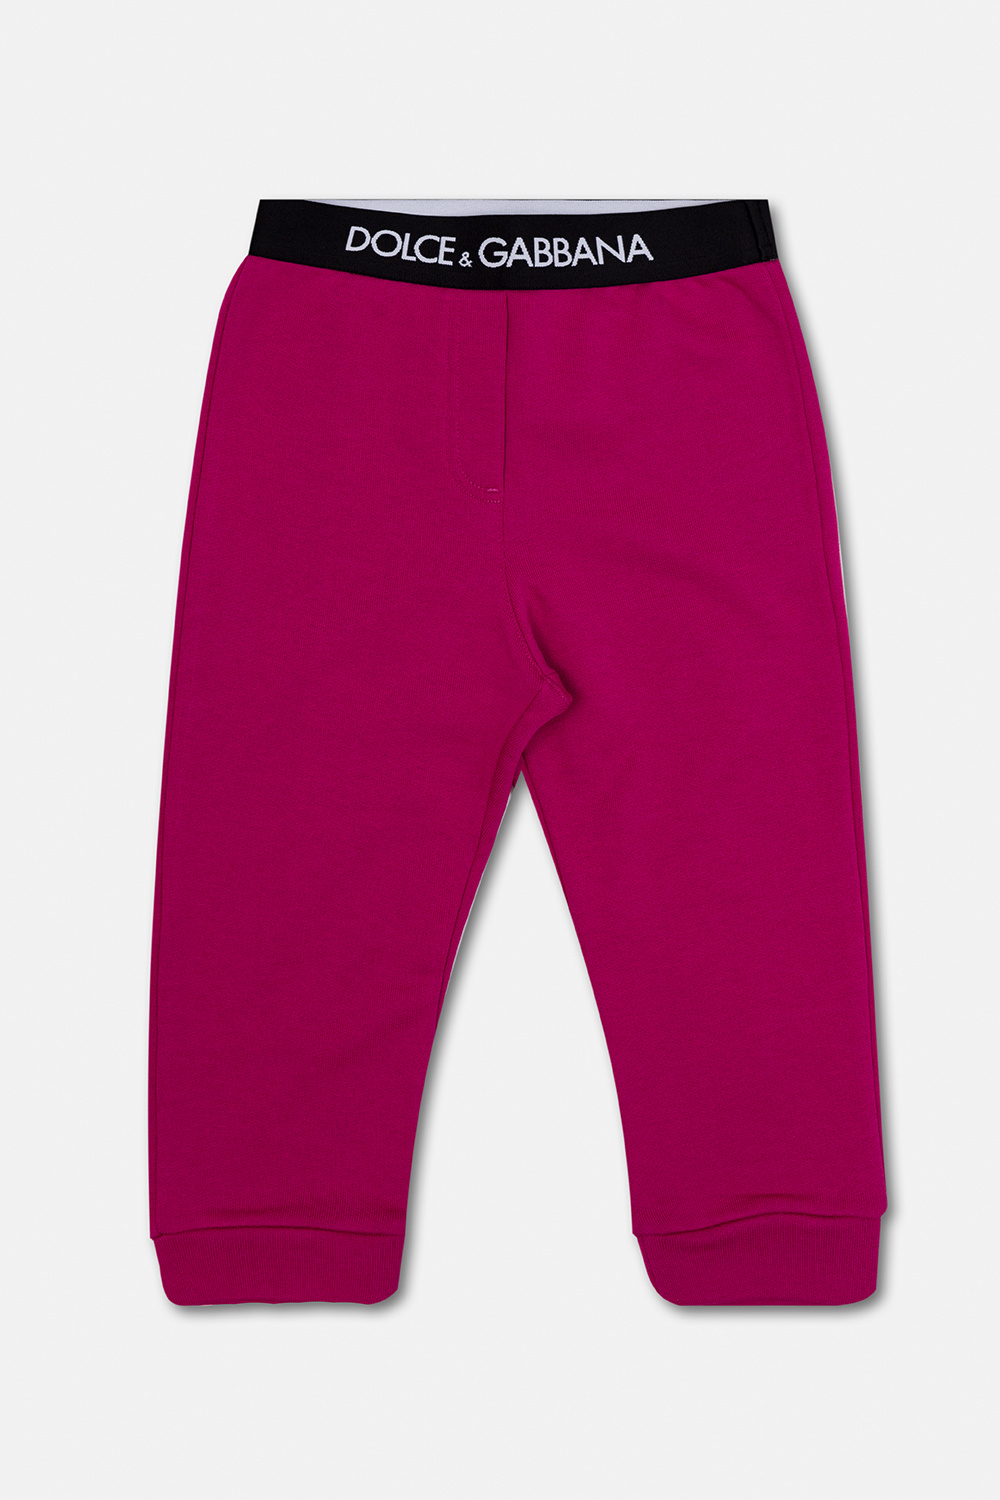 Dolce & Gabbana Kids neck Homme trousers with logo